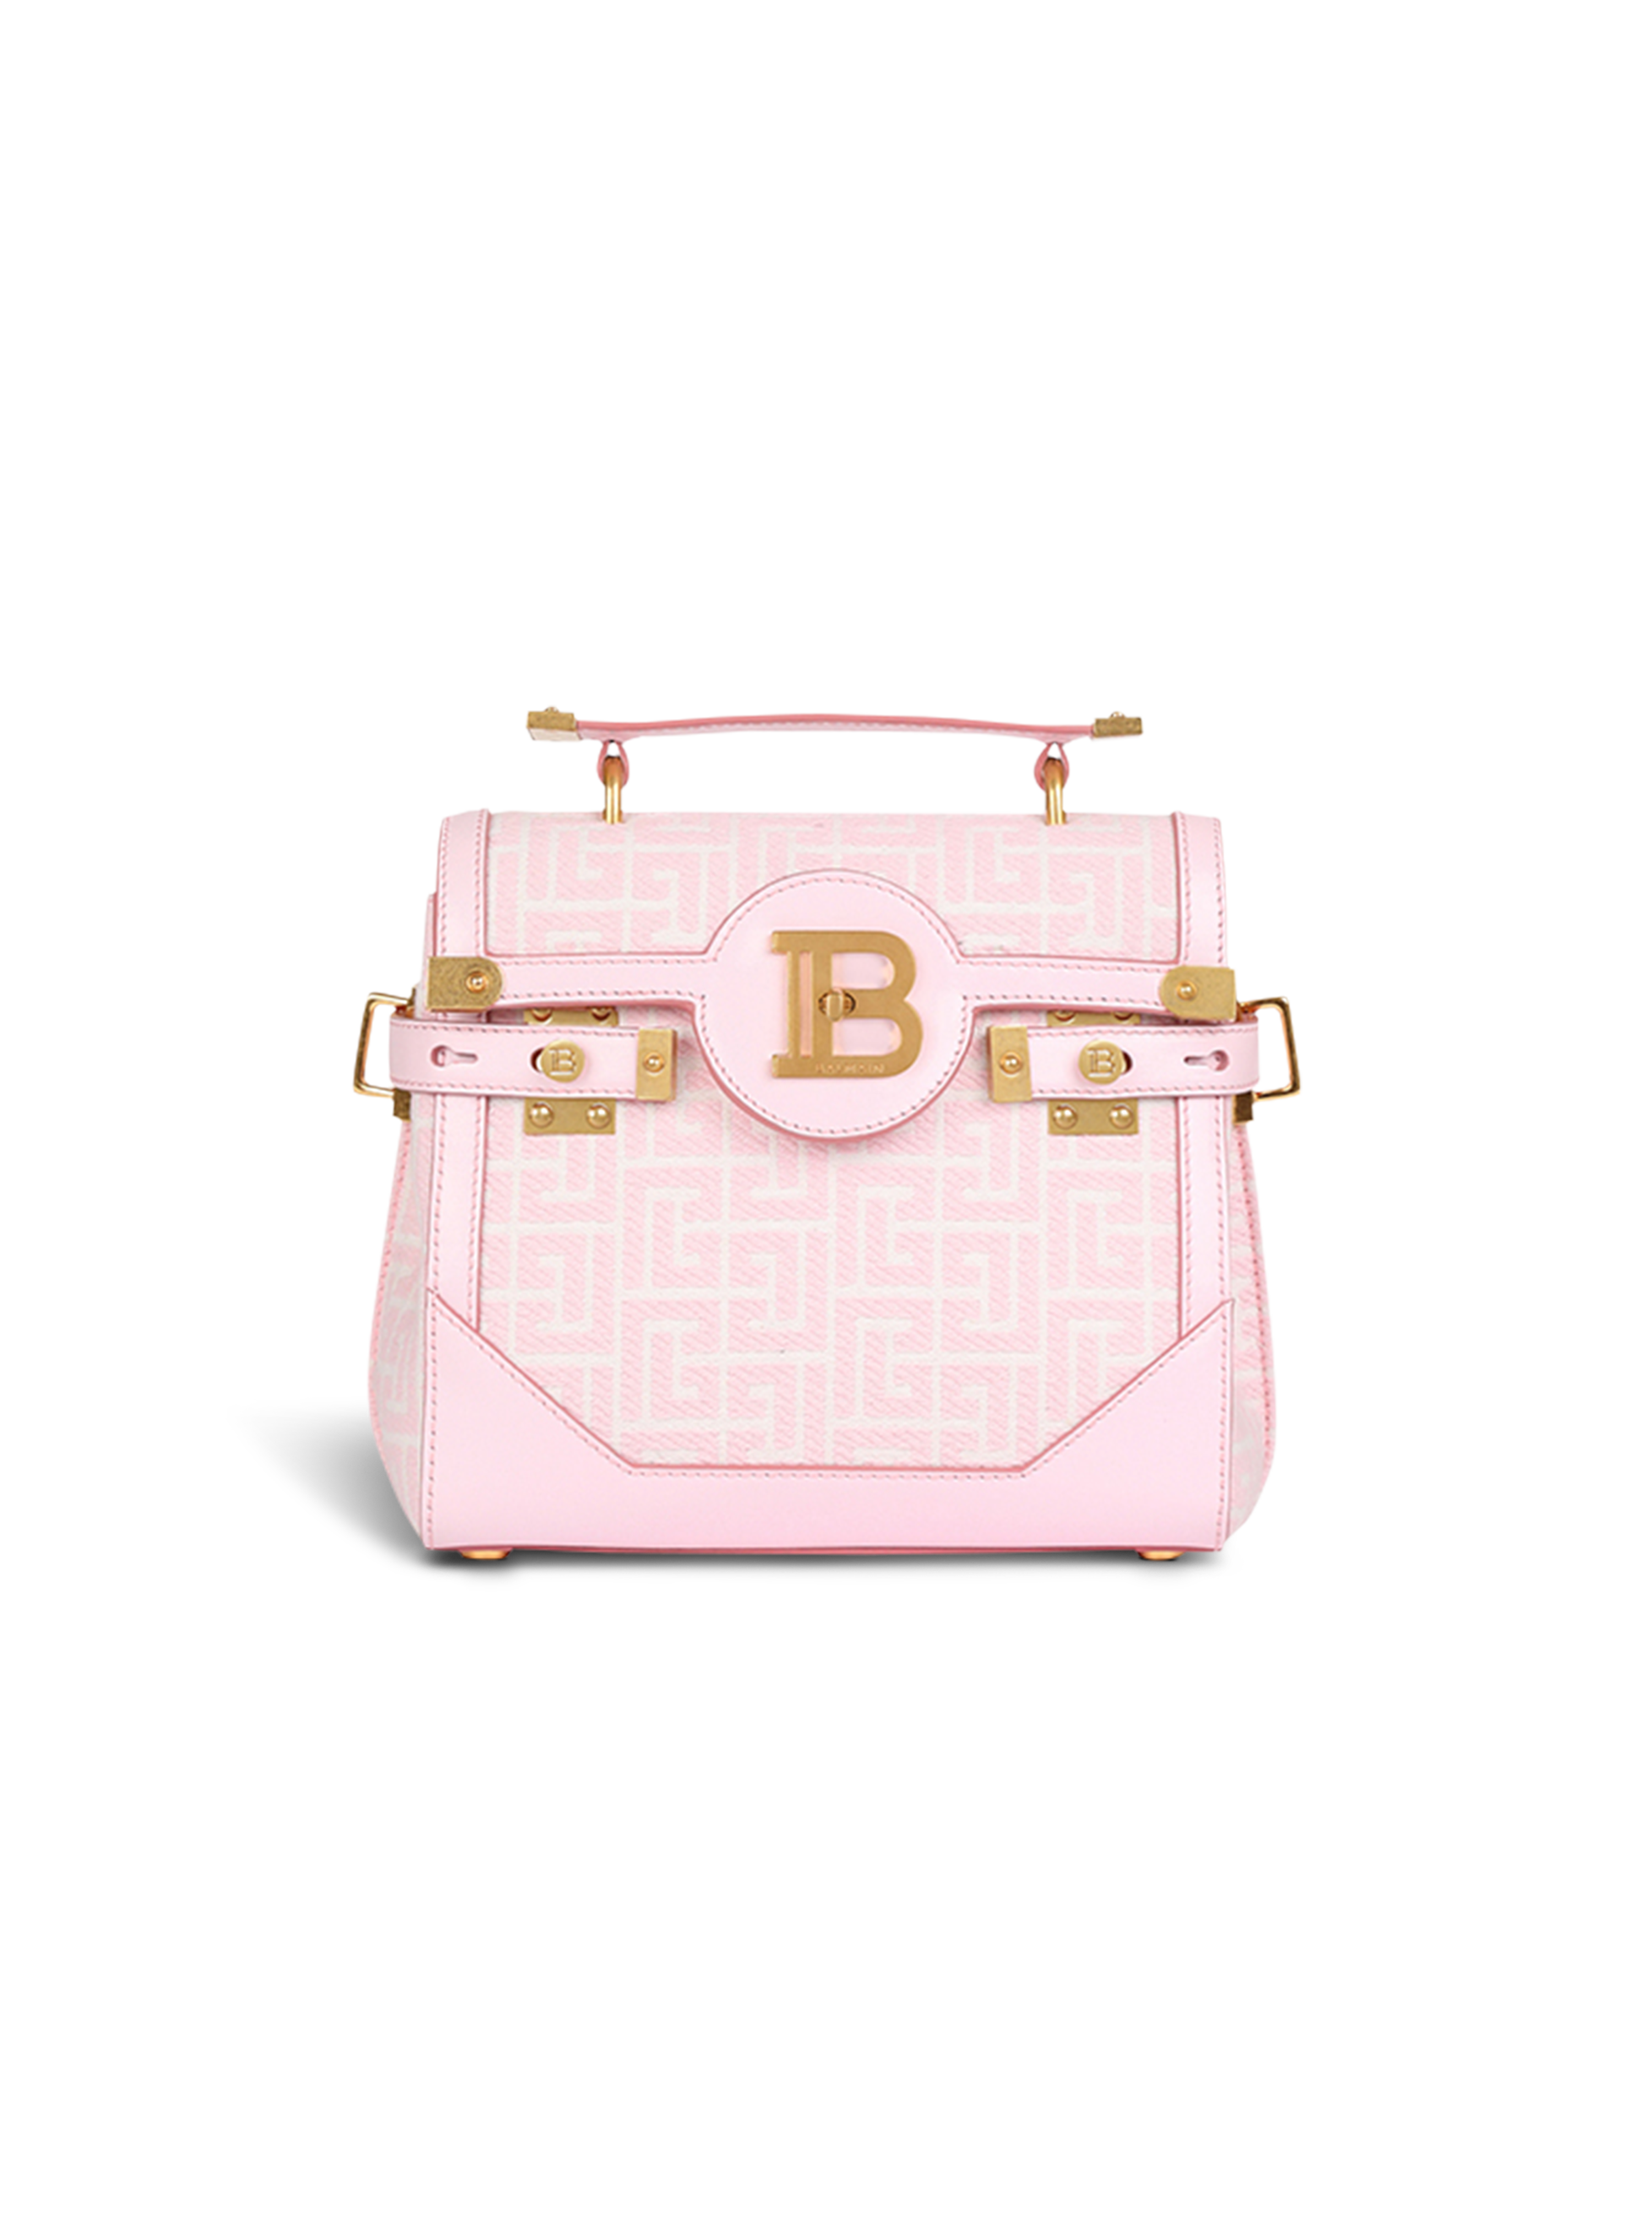 Bicolor jacquard B-Buzz 23 bag with black leather panel, pink